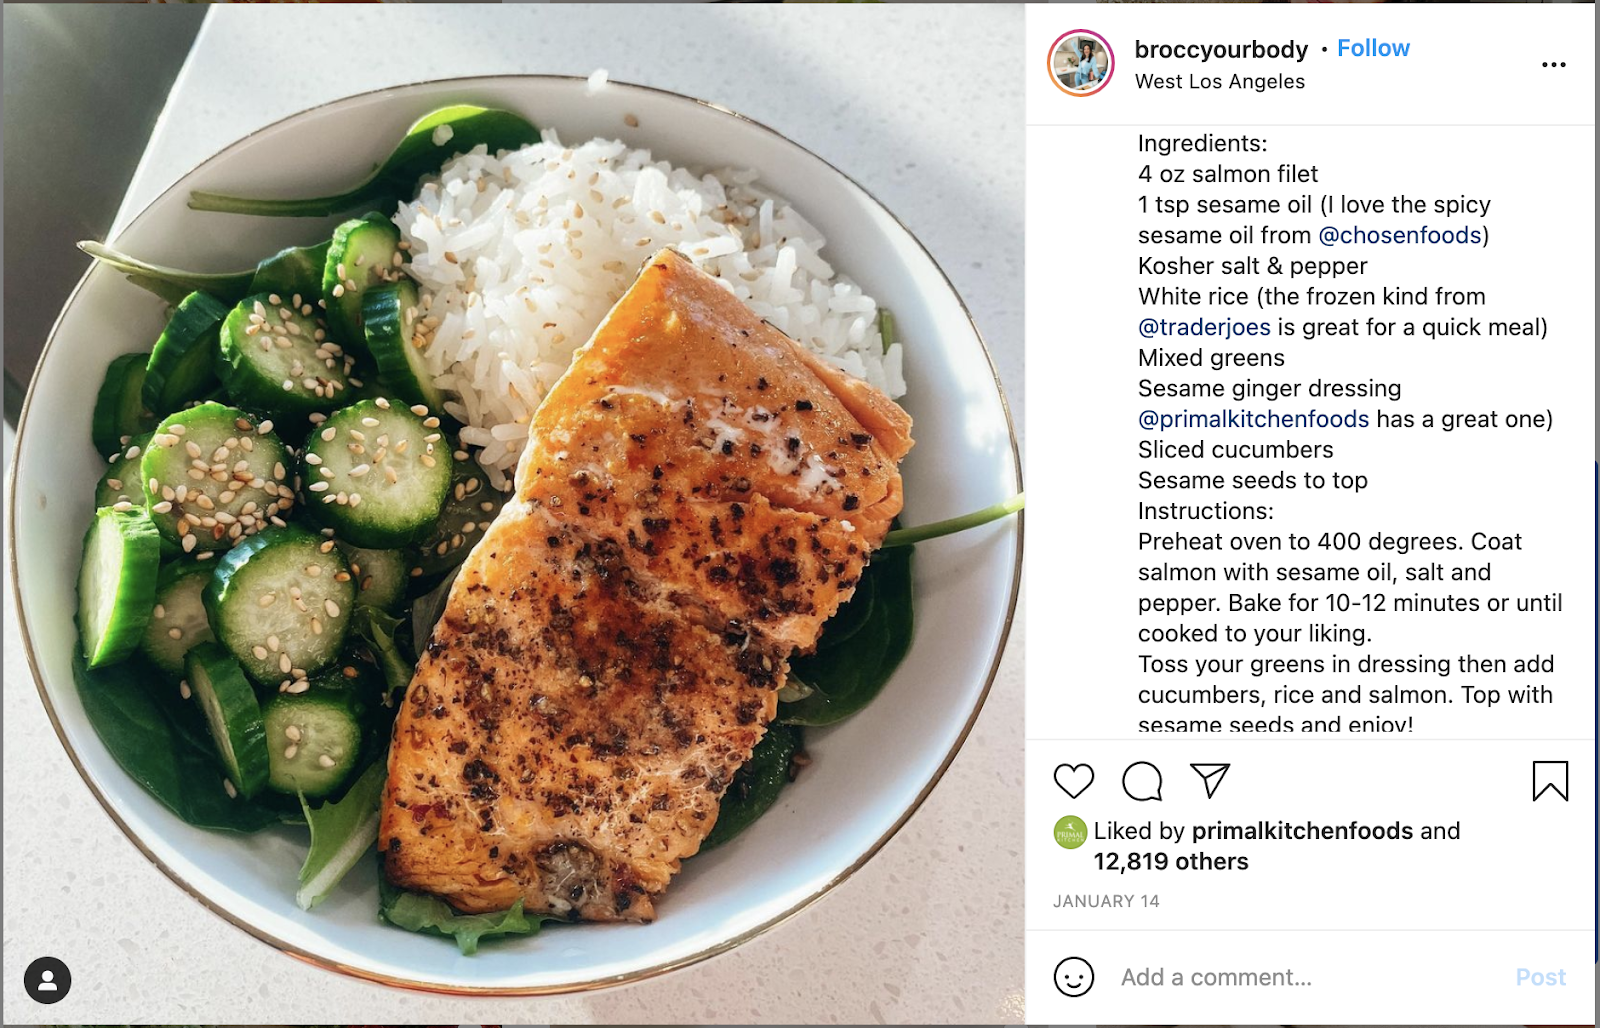 Instagram post with salmon and vegetables